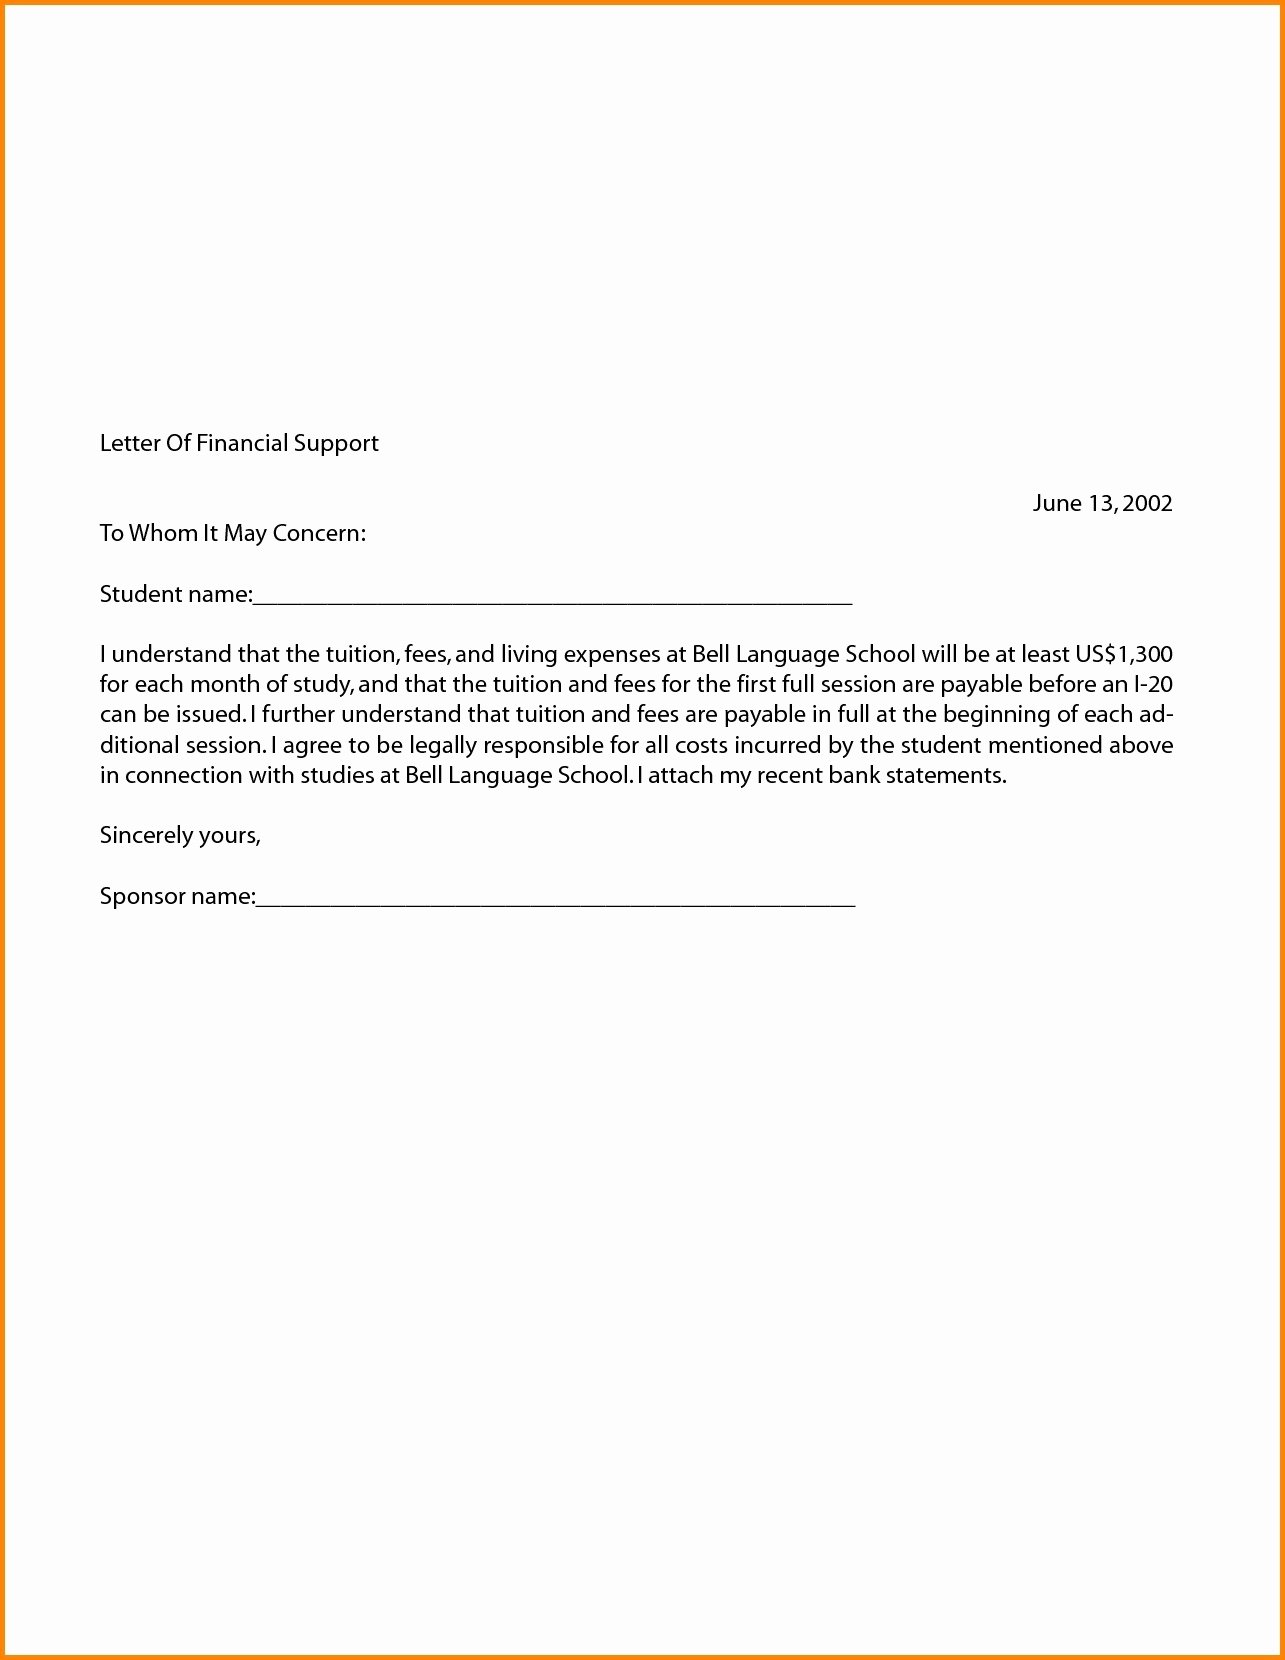 Letter Of Financial Support Template New Letter Financial Support Template